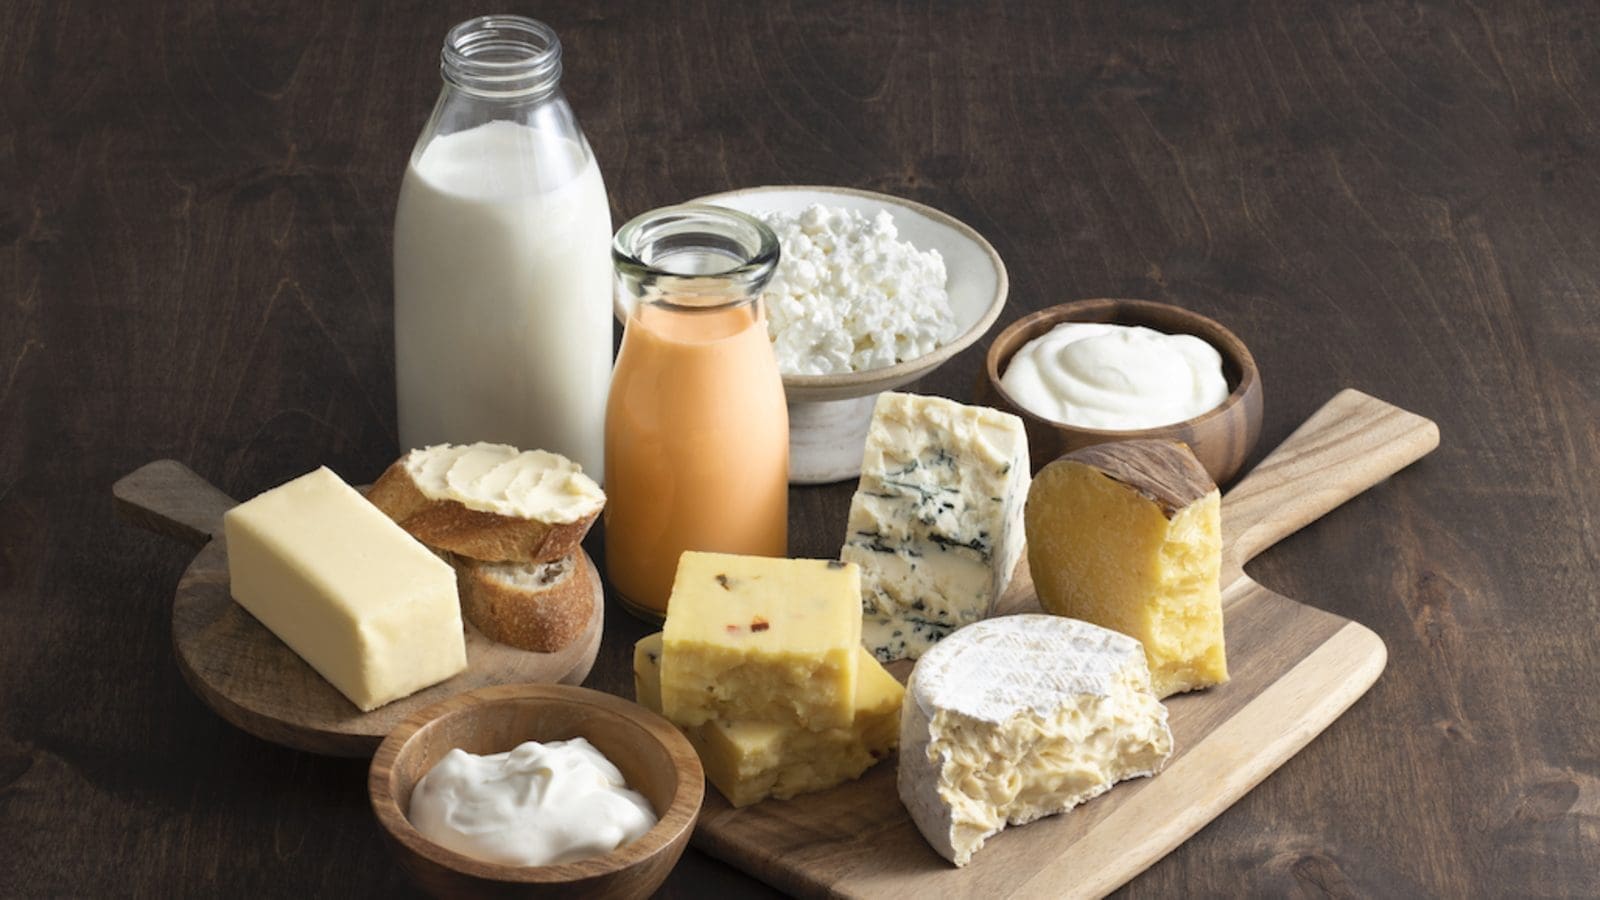 Eucolait decries decision by Poland, Hungary and Slovakia to ban dairy imports from Ukraine